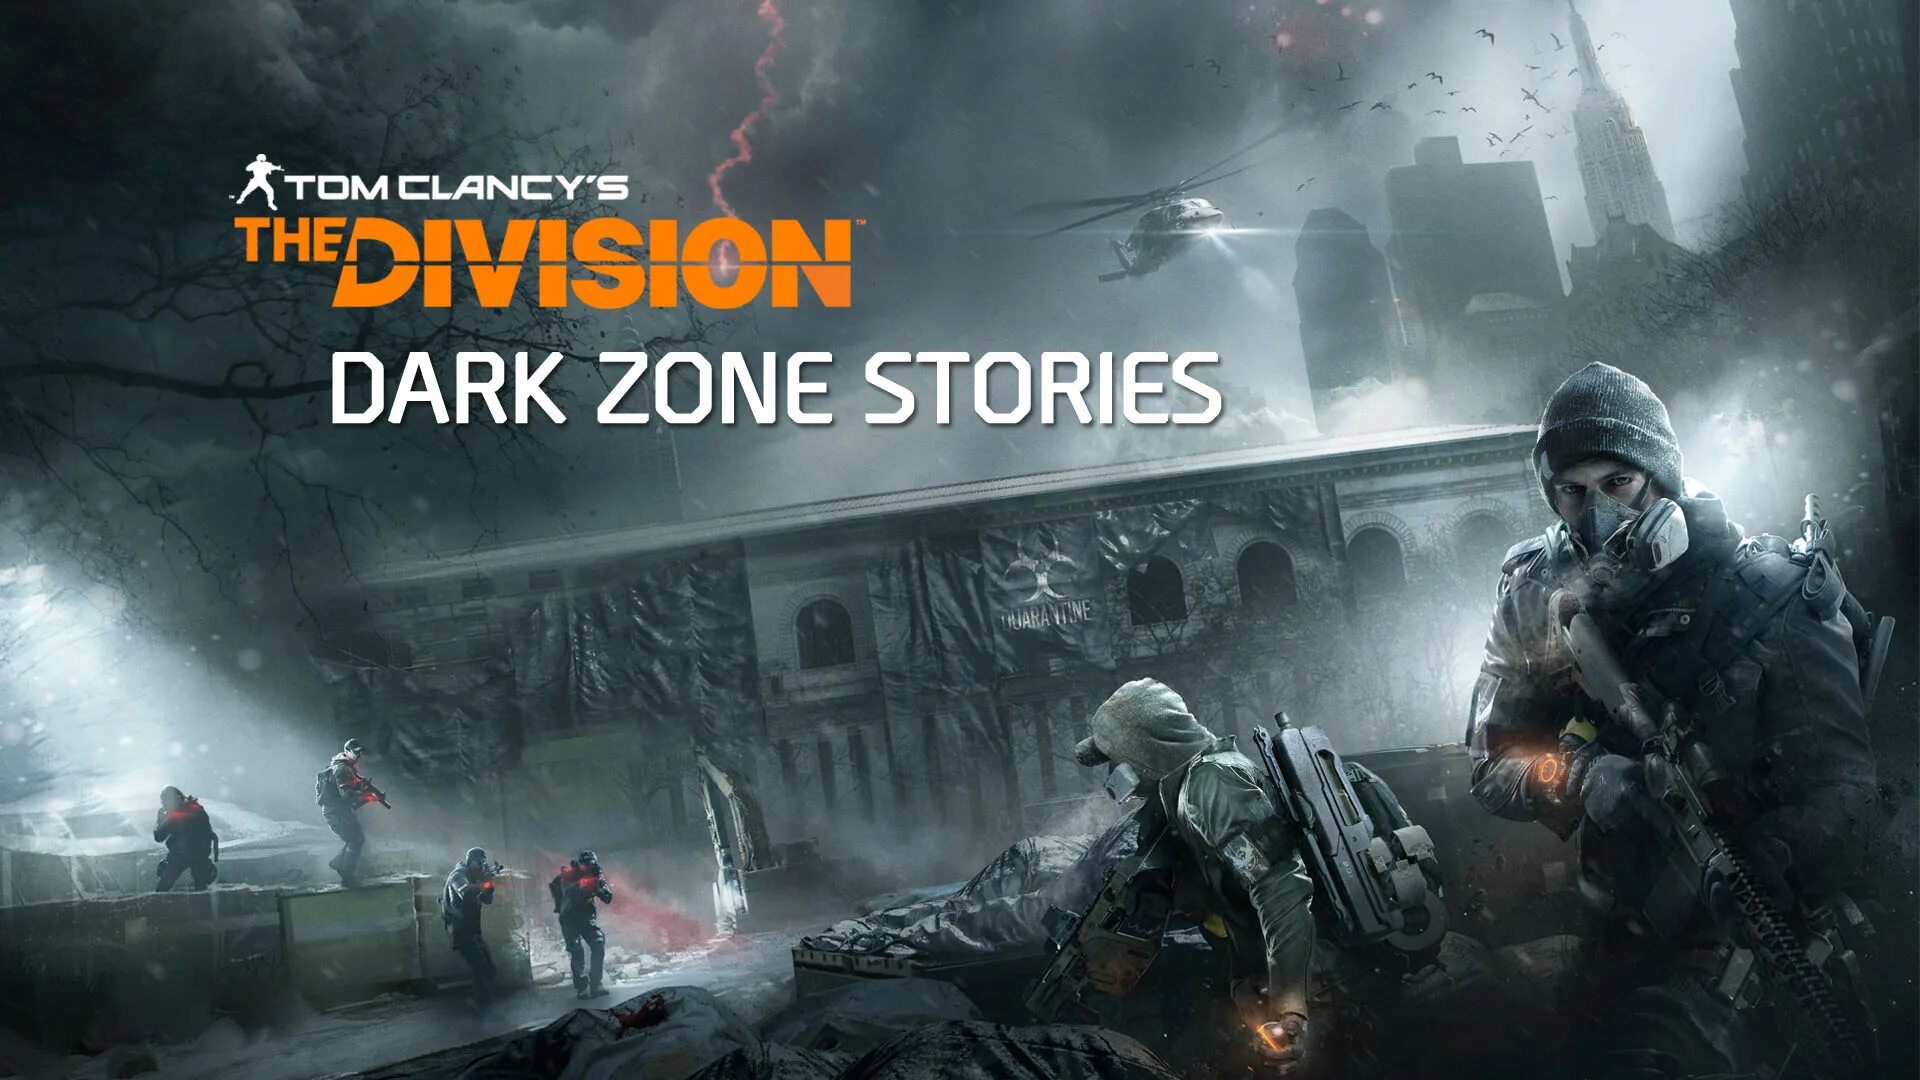 Tom Clancy s the Division 2. Ренегат the Division. Tom Clancy's Ренегаты. Картинки the Division. Tom clancy s по порядку